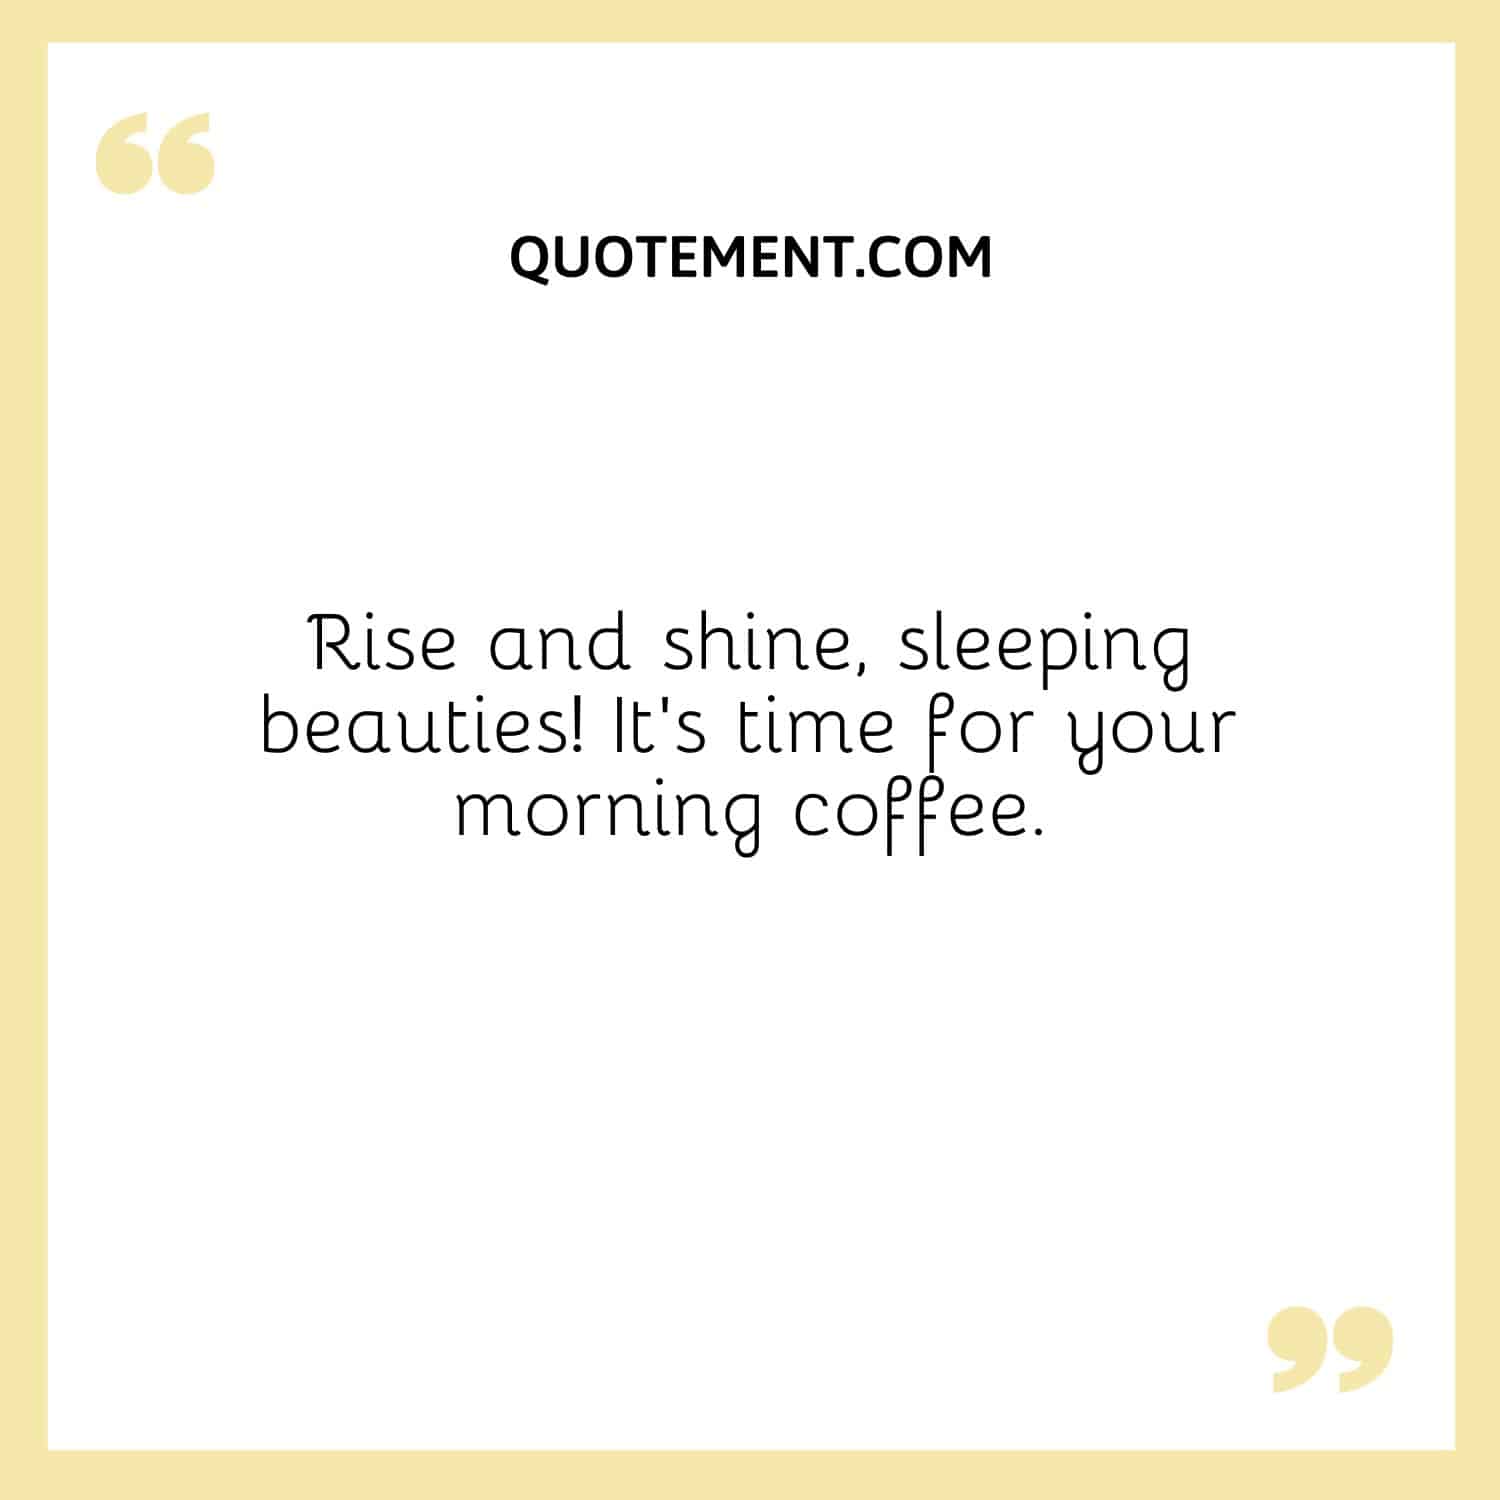 Rise and shine, sleeping beauties! It’s time for your morning coffee.